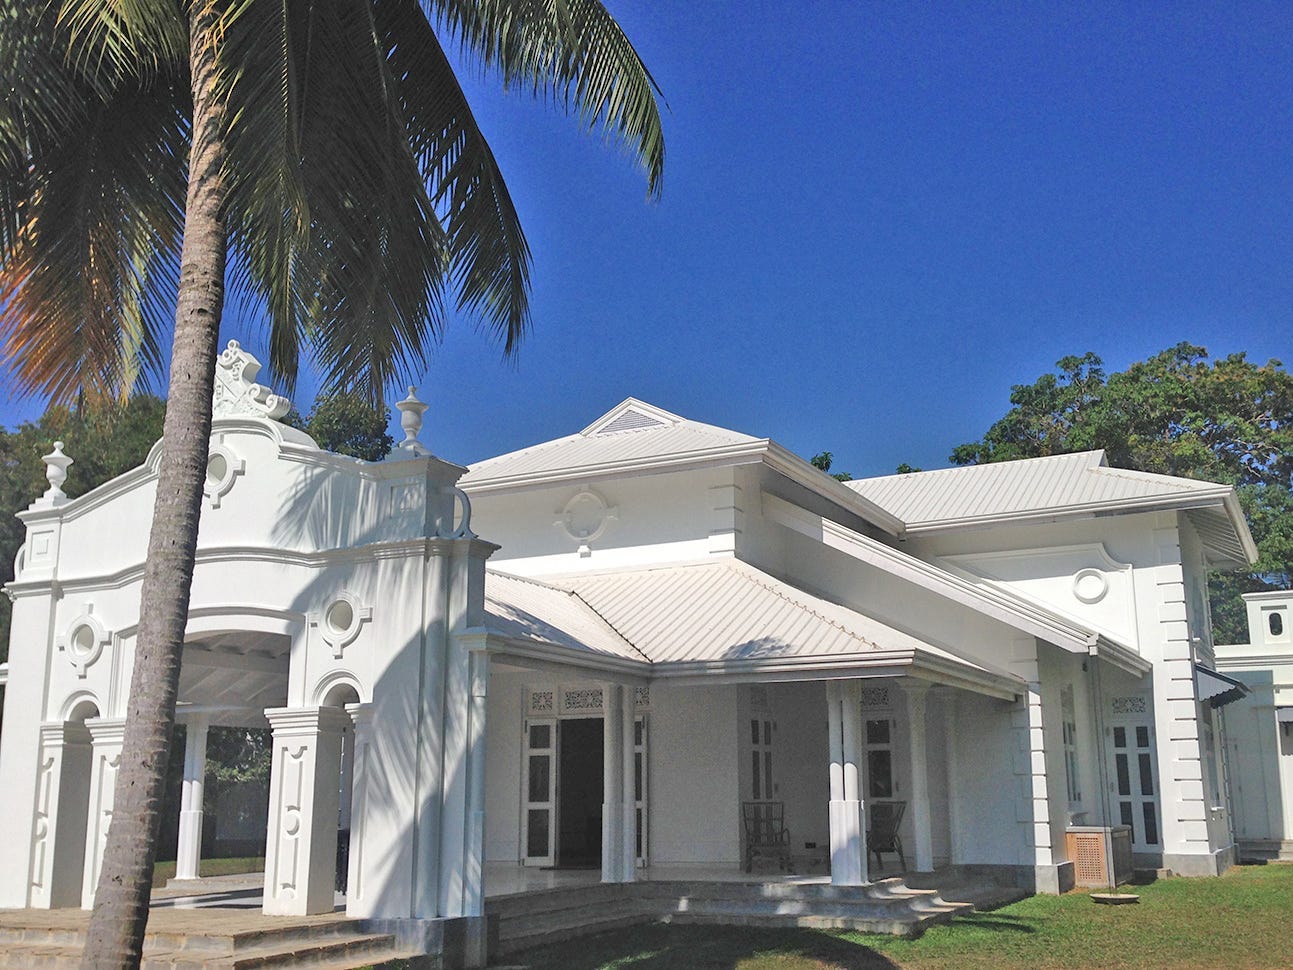 Exterior of the renovated Sri Lanka home shows an all-white finish